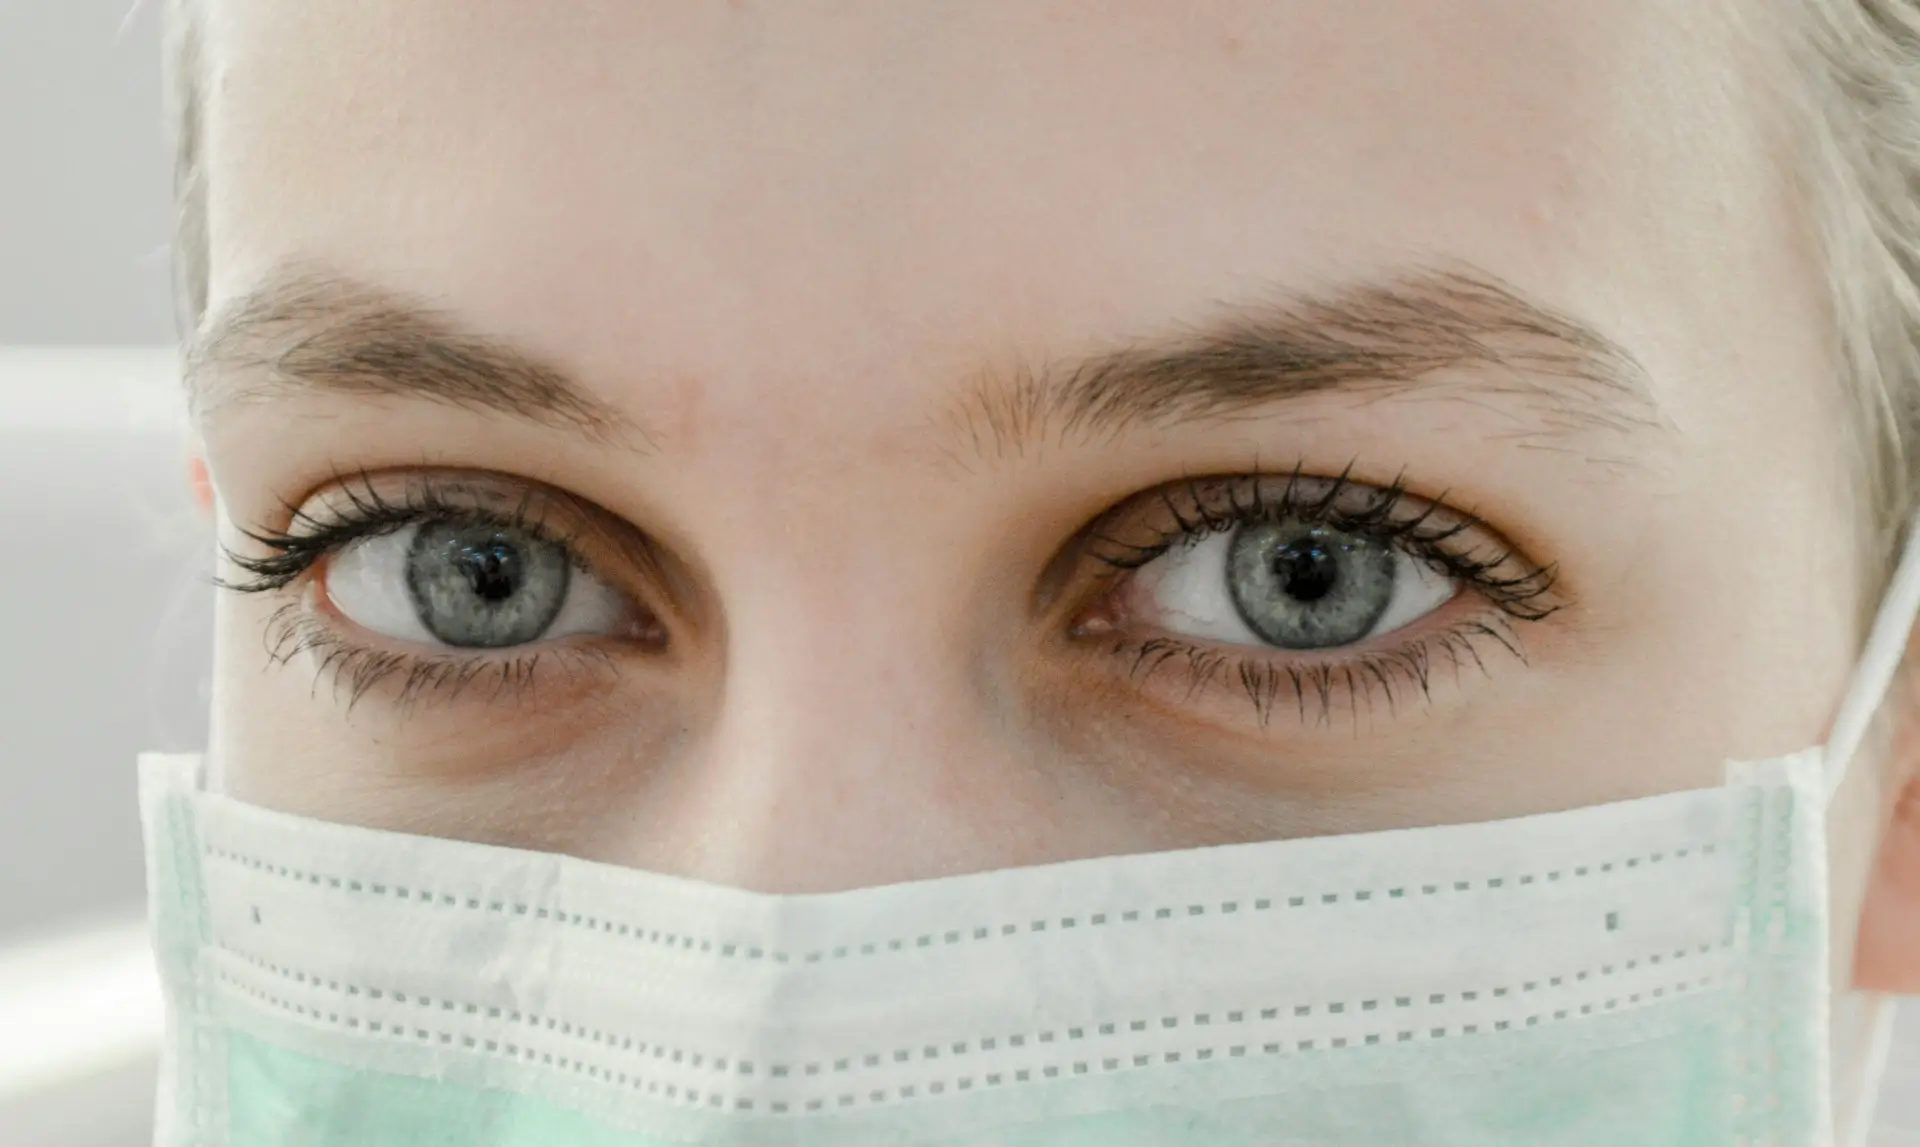 close up image of a face of a healthcare professional wearing PPE